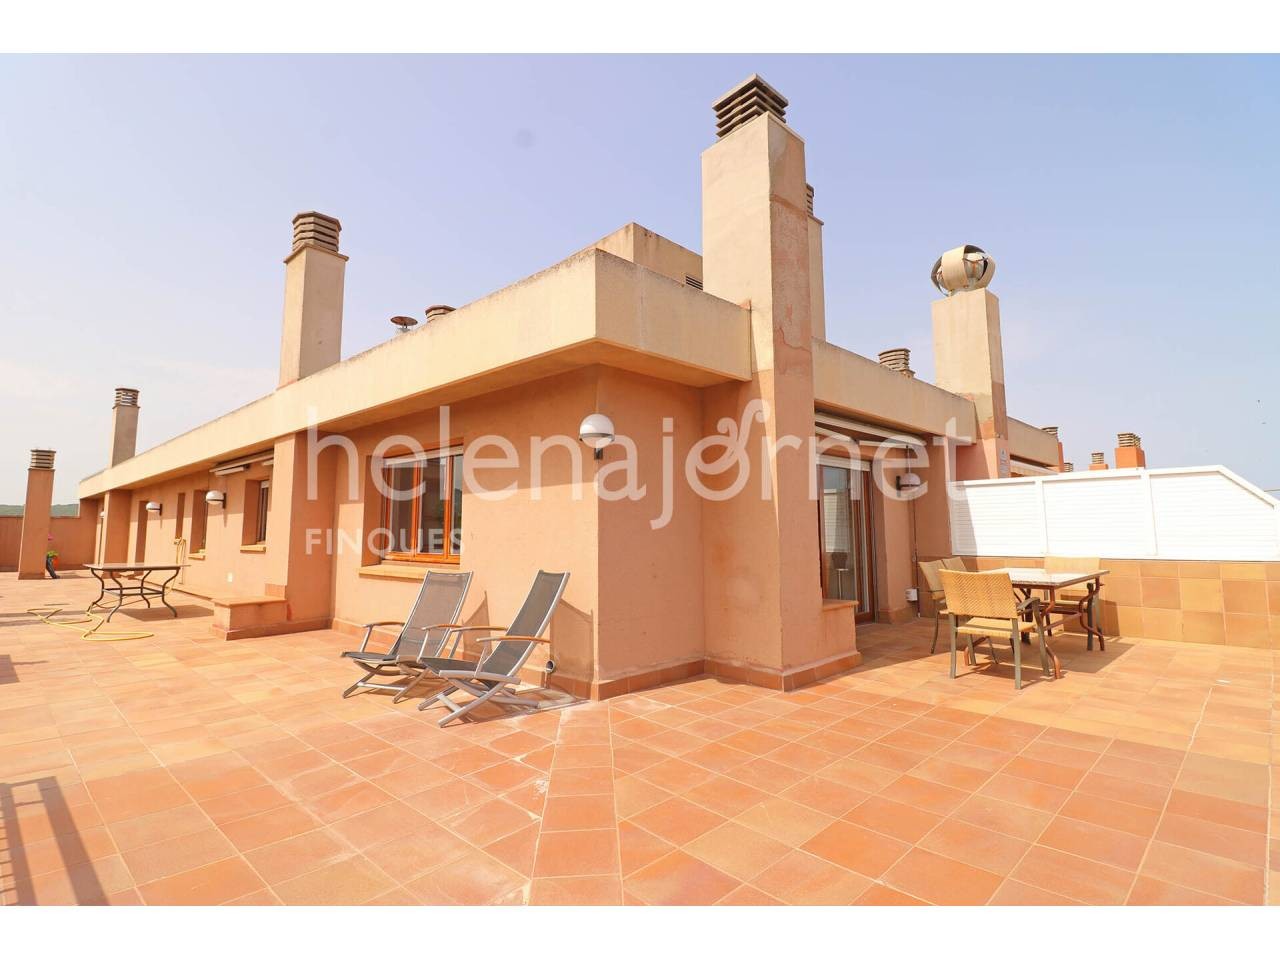 AMAZING PENTHOUSE LOCATED IN FRONT OF THE SEA WITH A BIG TERRACE  - 4419